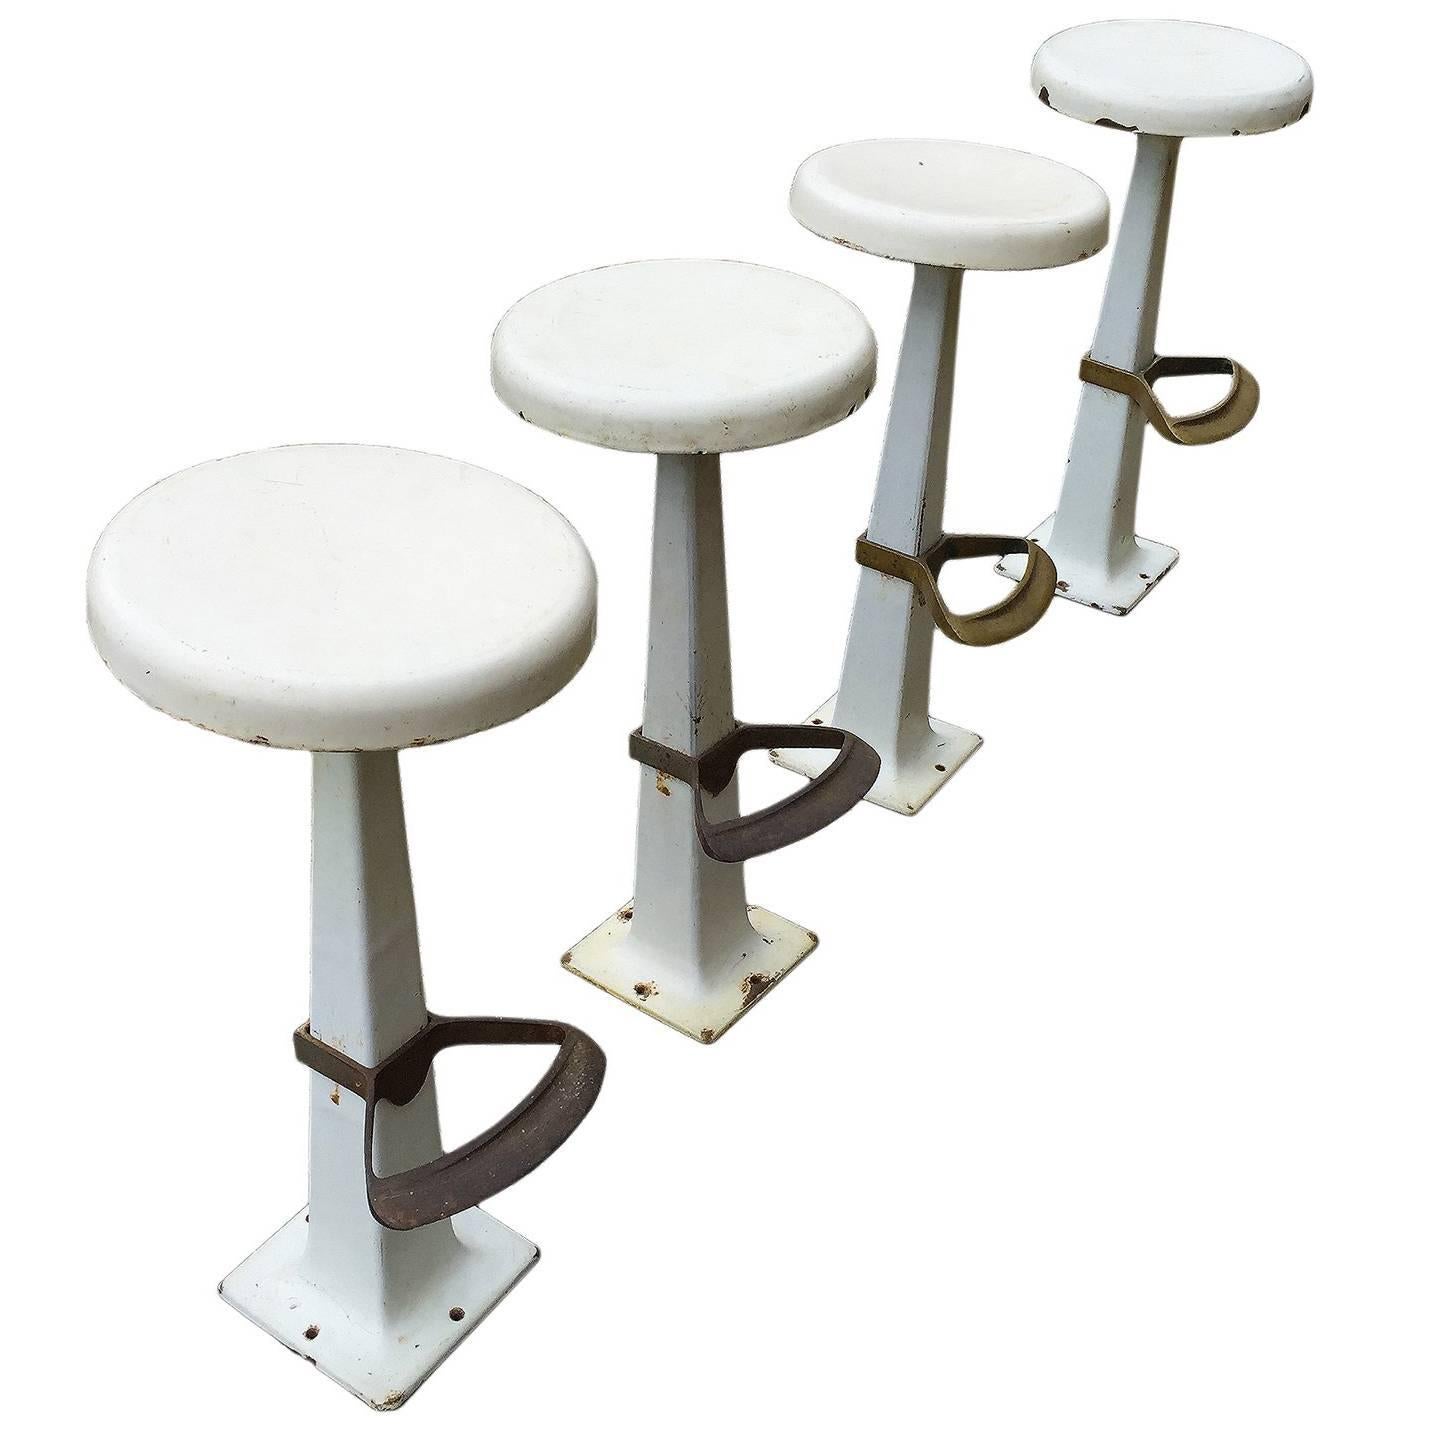 Group of Four Beautiful White Enameled Metal Stools with Footrest, circa 1930